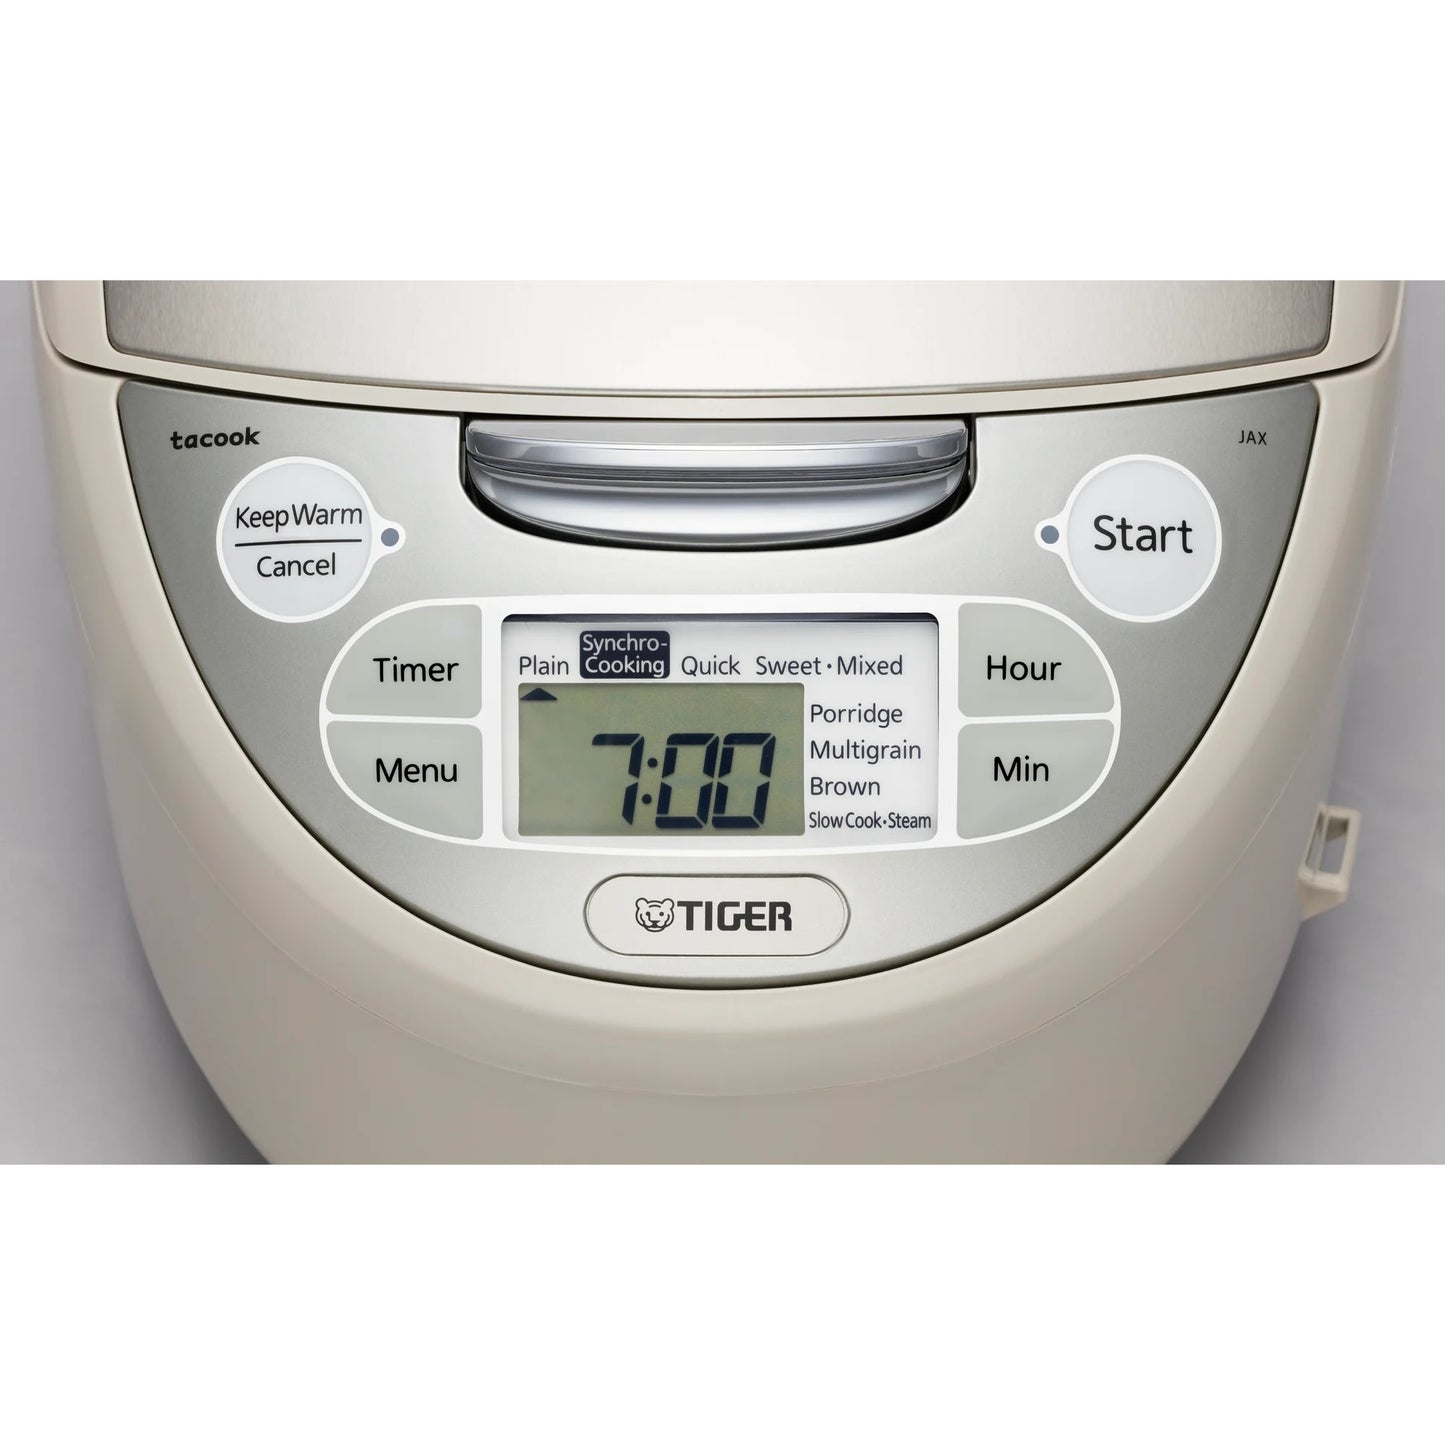 Tiger Rice Cooker JAX-S10S/S18S (Made in Japan)